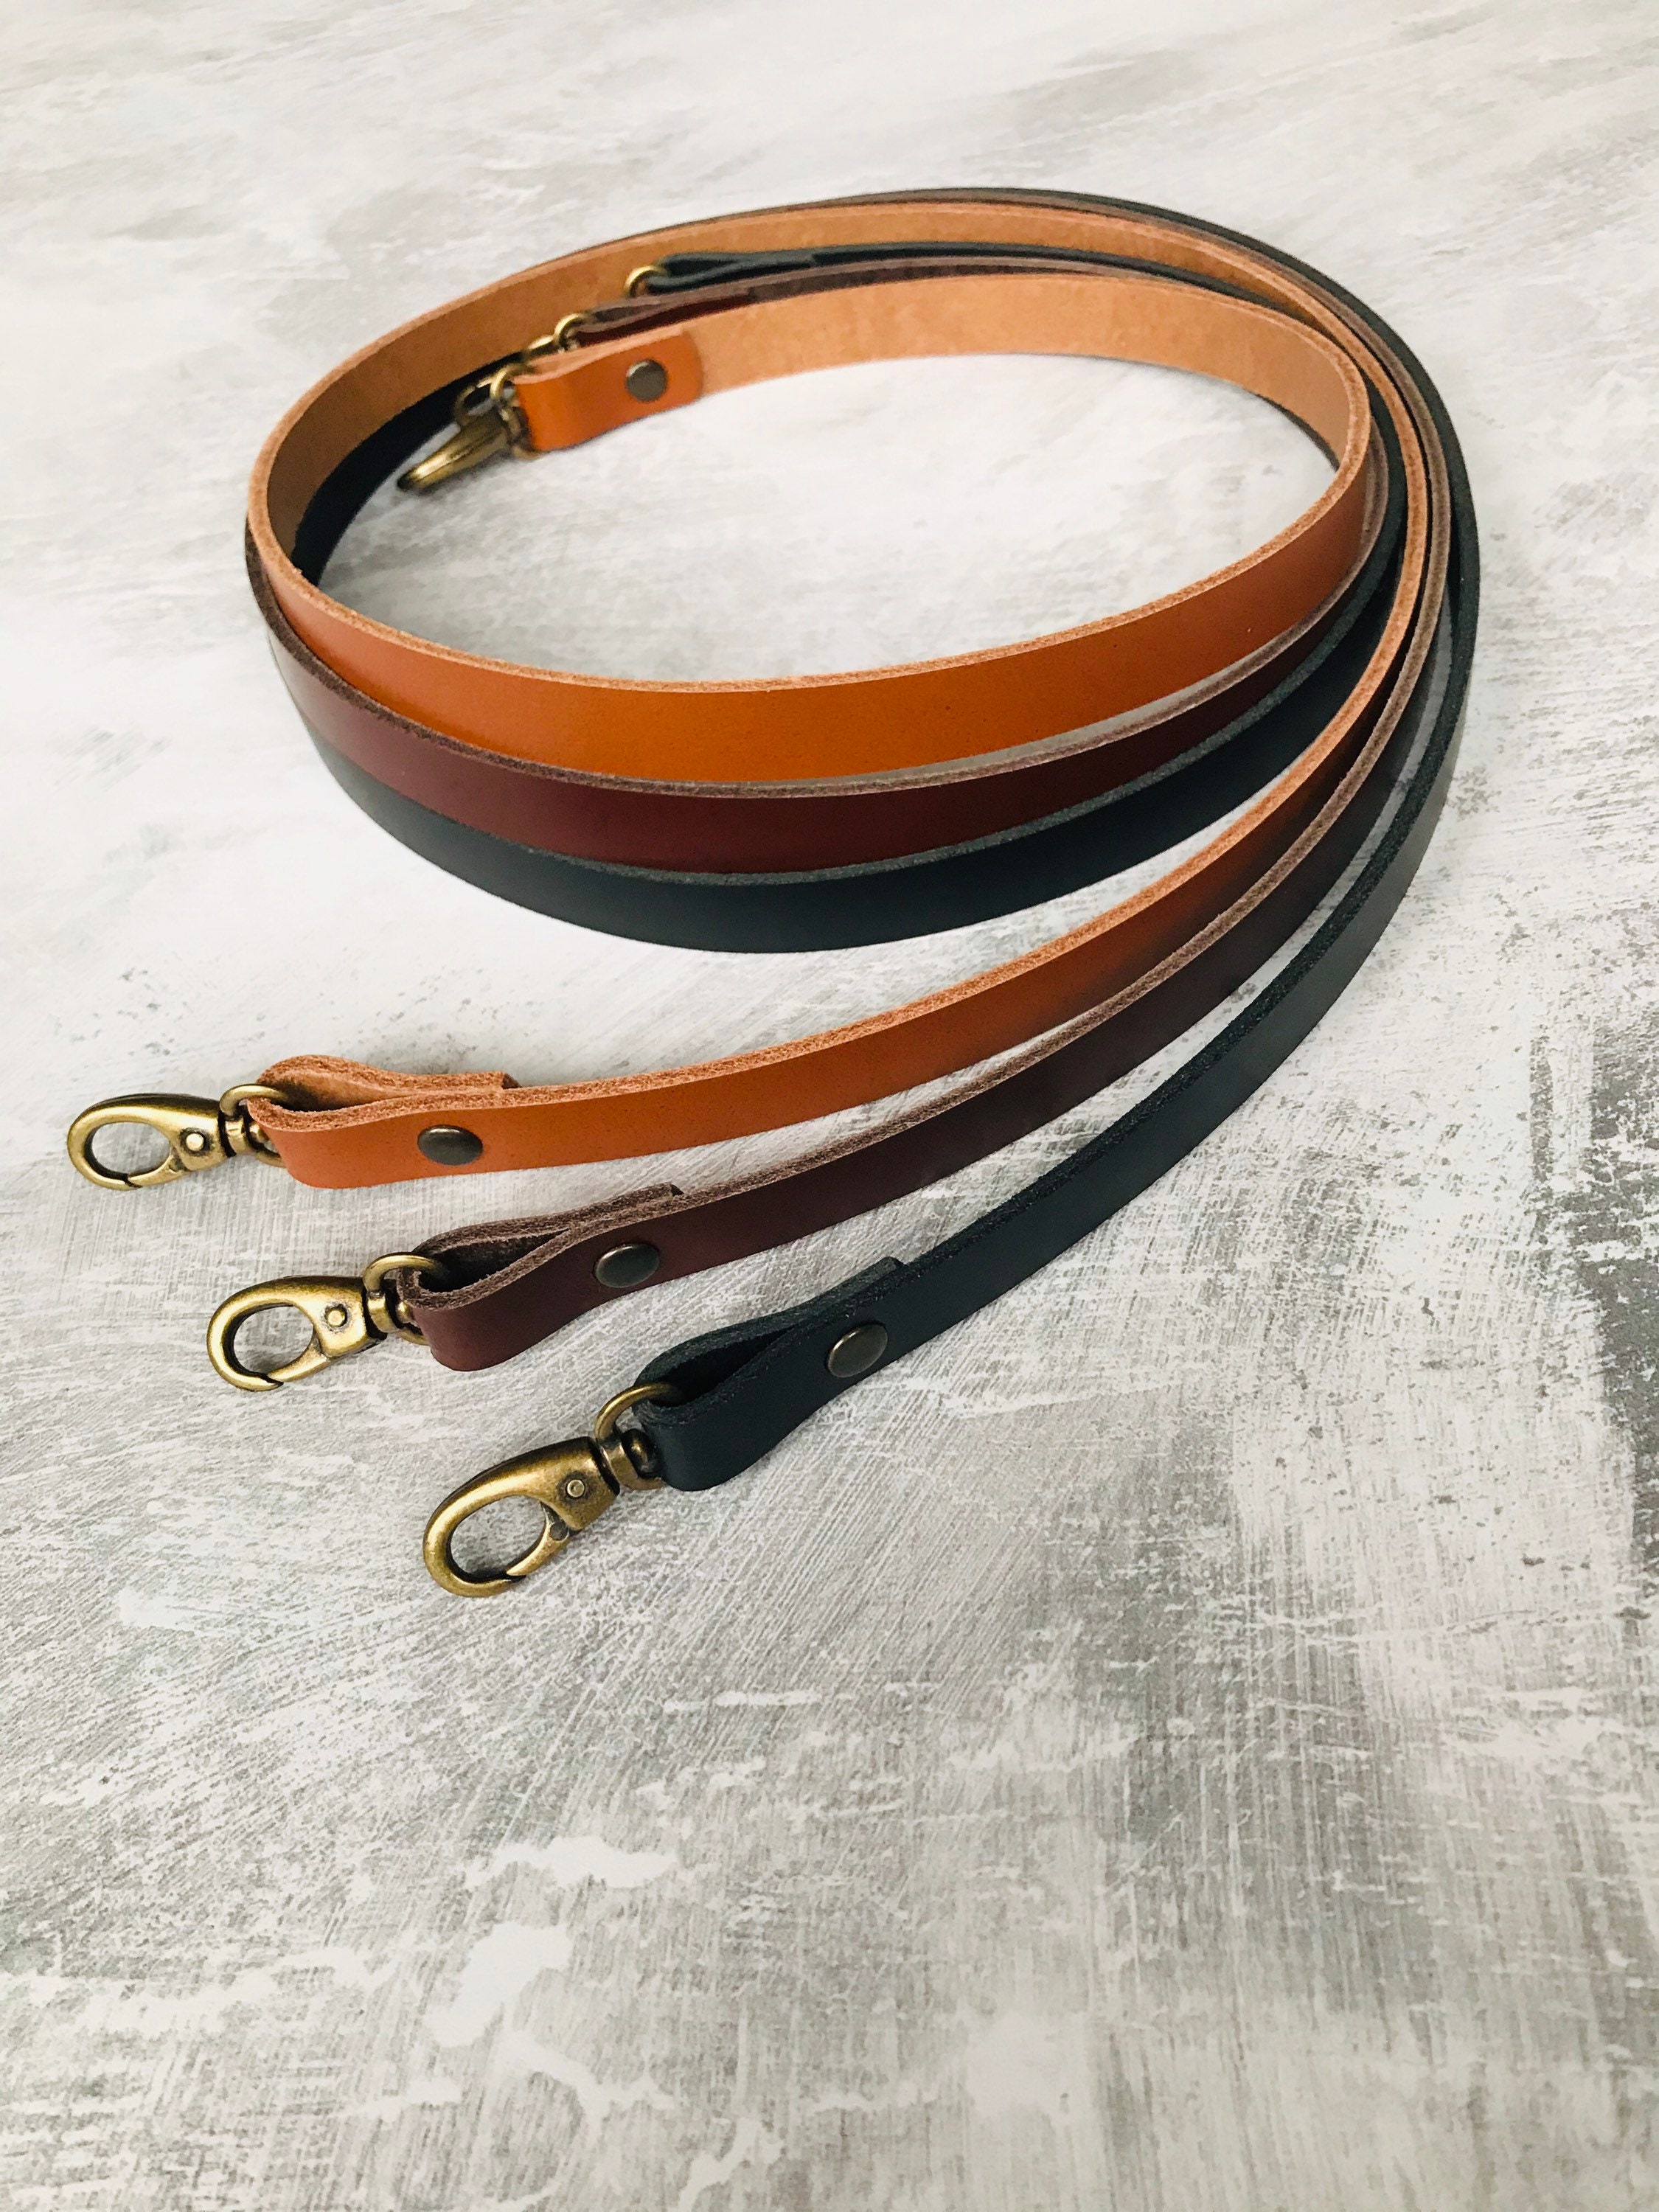 Leather Strap for Longchamp, Genuine Leather Straps Replacement with 2  Punch-Free Adapters Adjustabl…See more Leather Strap for Longchamp, Genuine